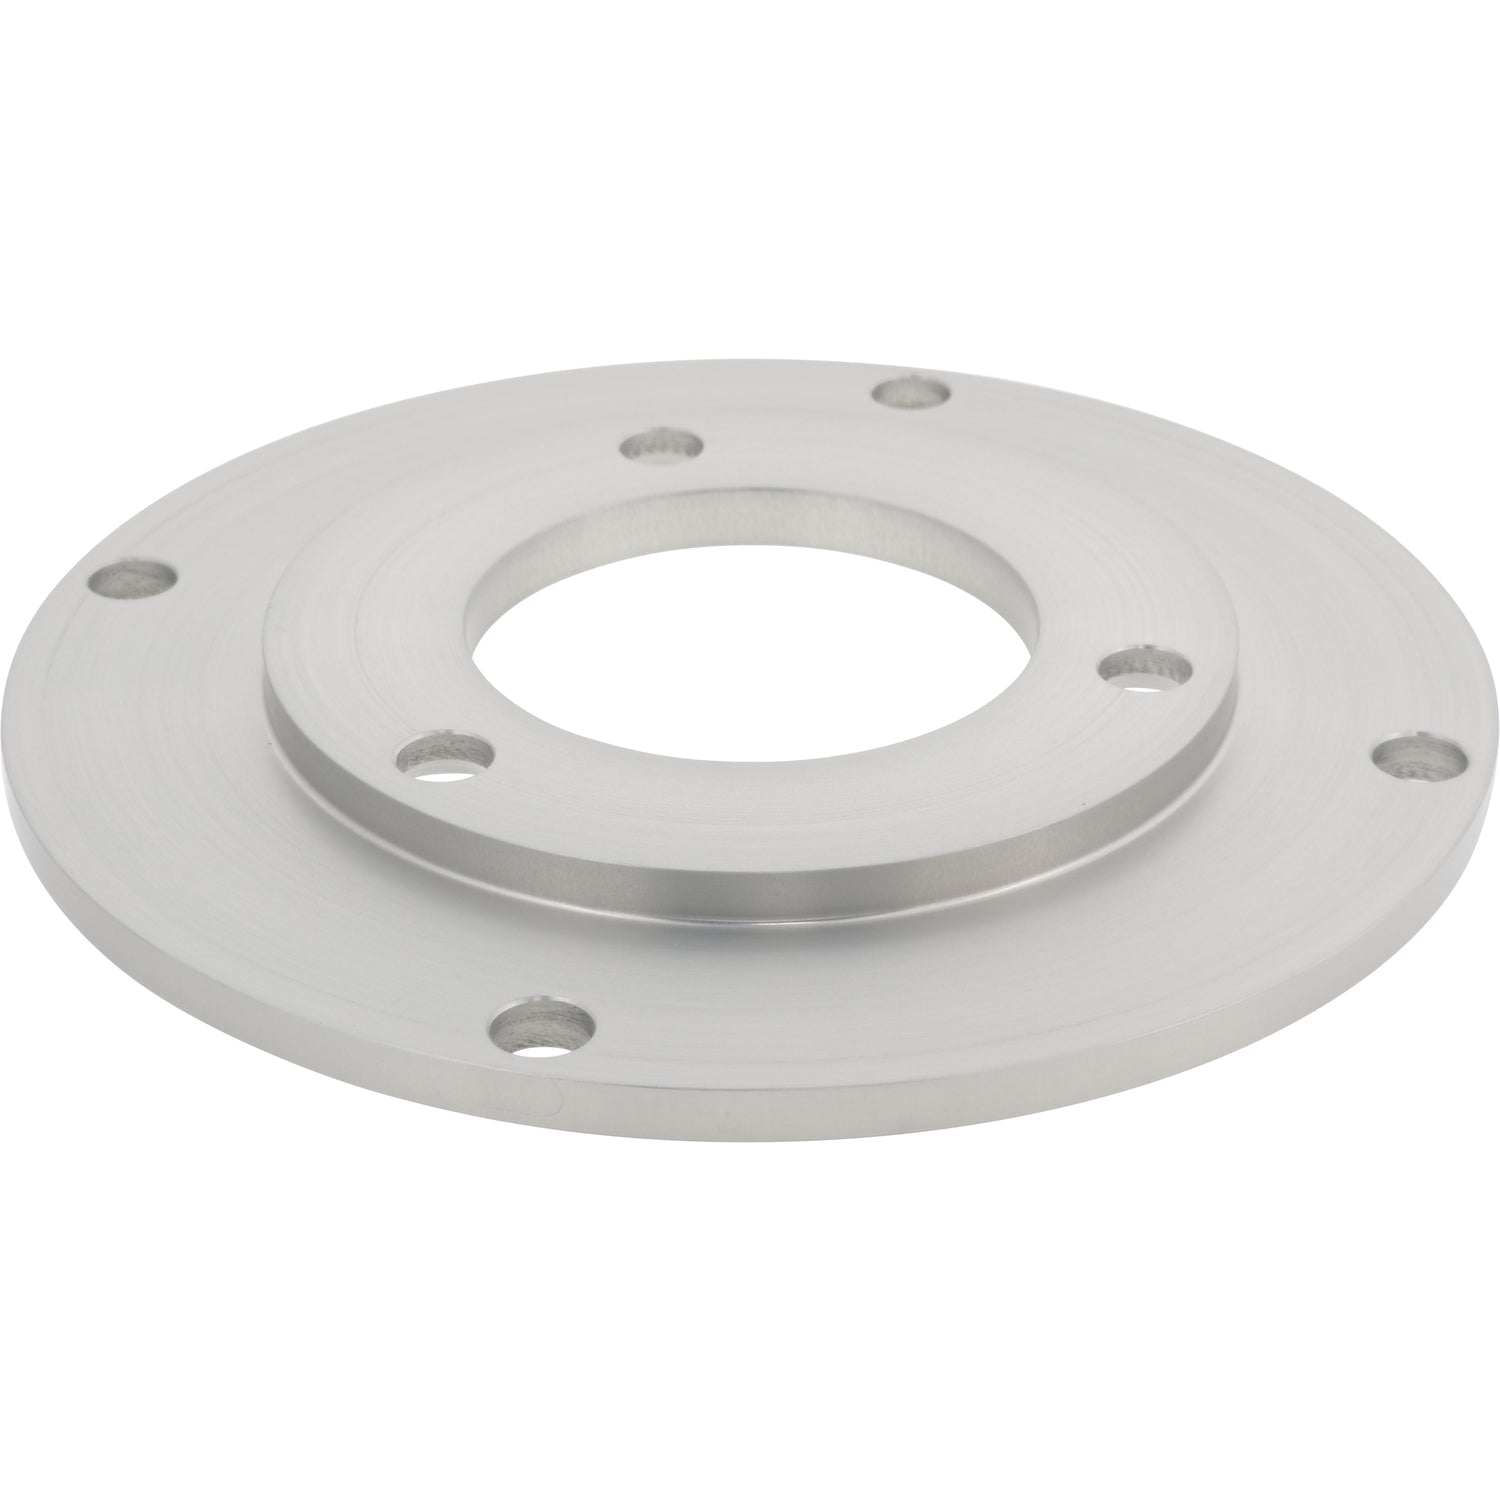 Disk shaped aluminum part with large center hole and multiple smaller mounting holes shown on white surface.